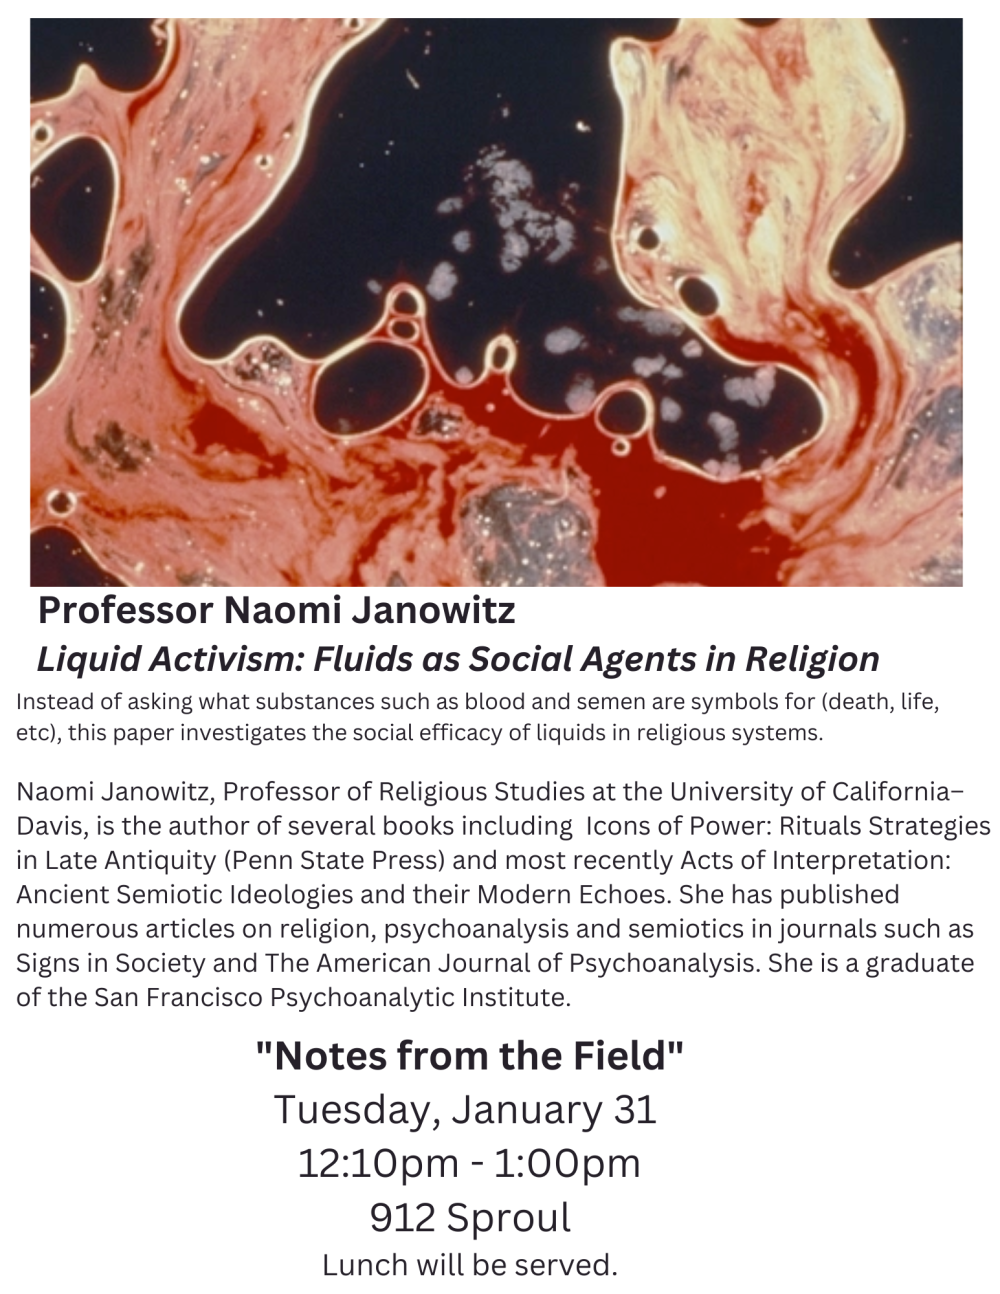 A flyer for the upcoming talk "Liquid Activism: Fluids as Social Agents in Religion"